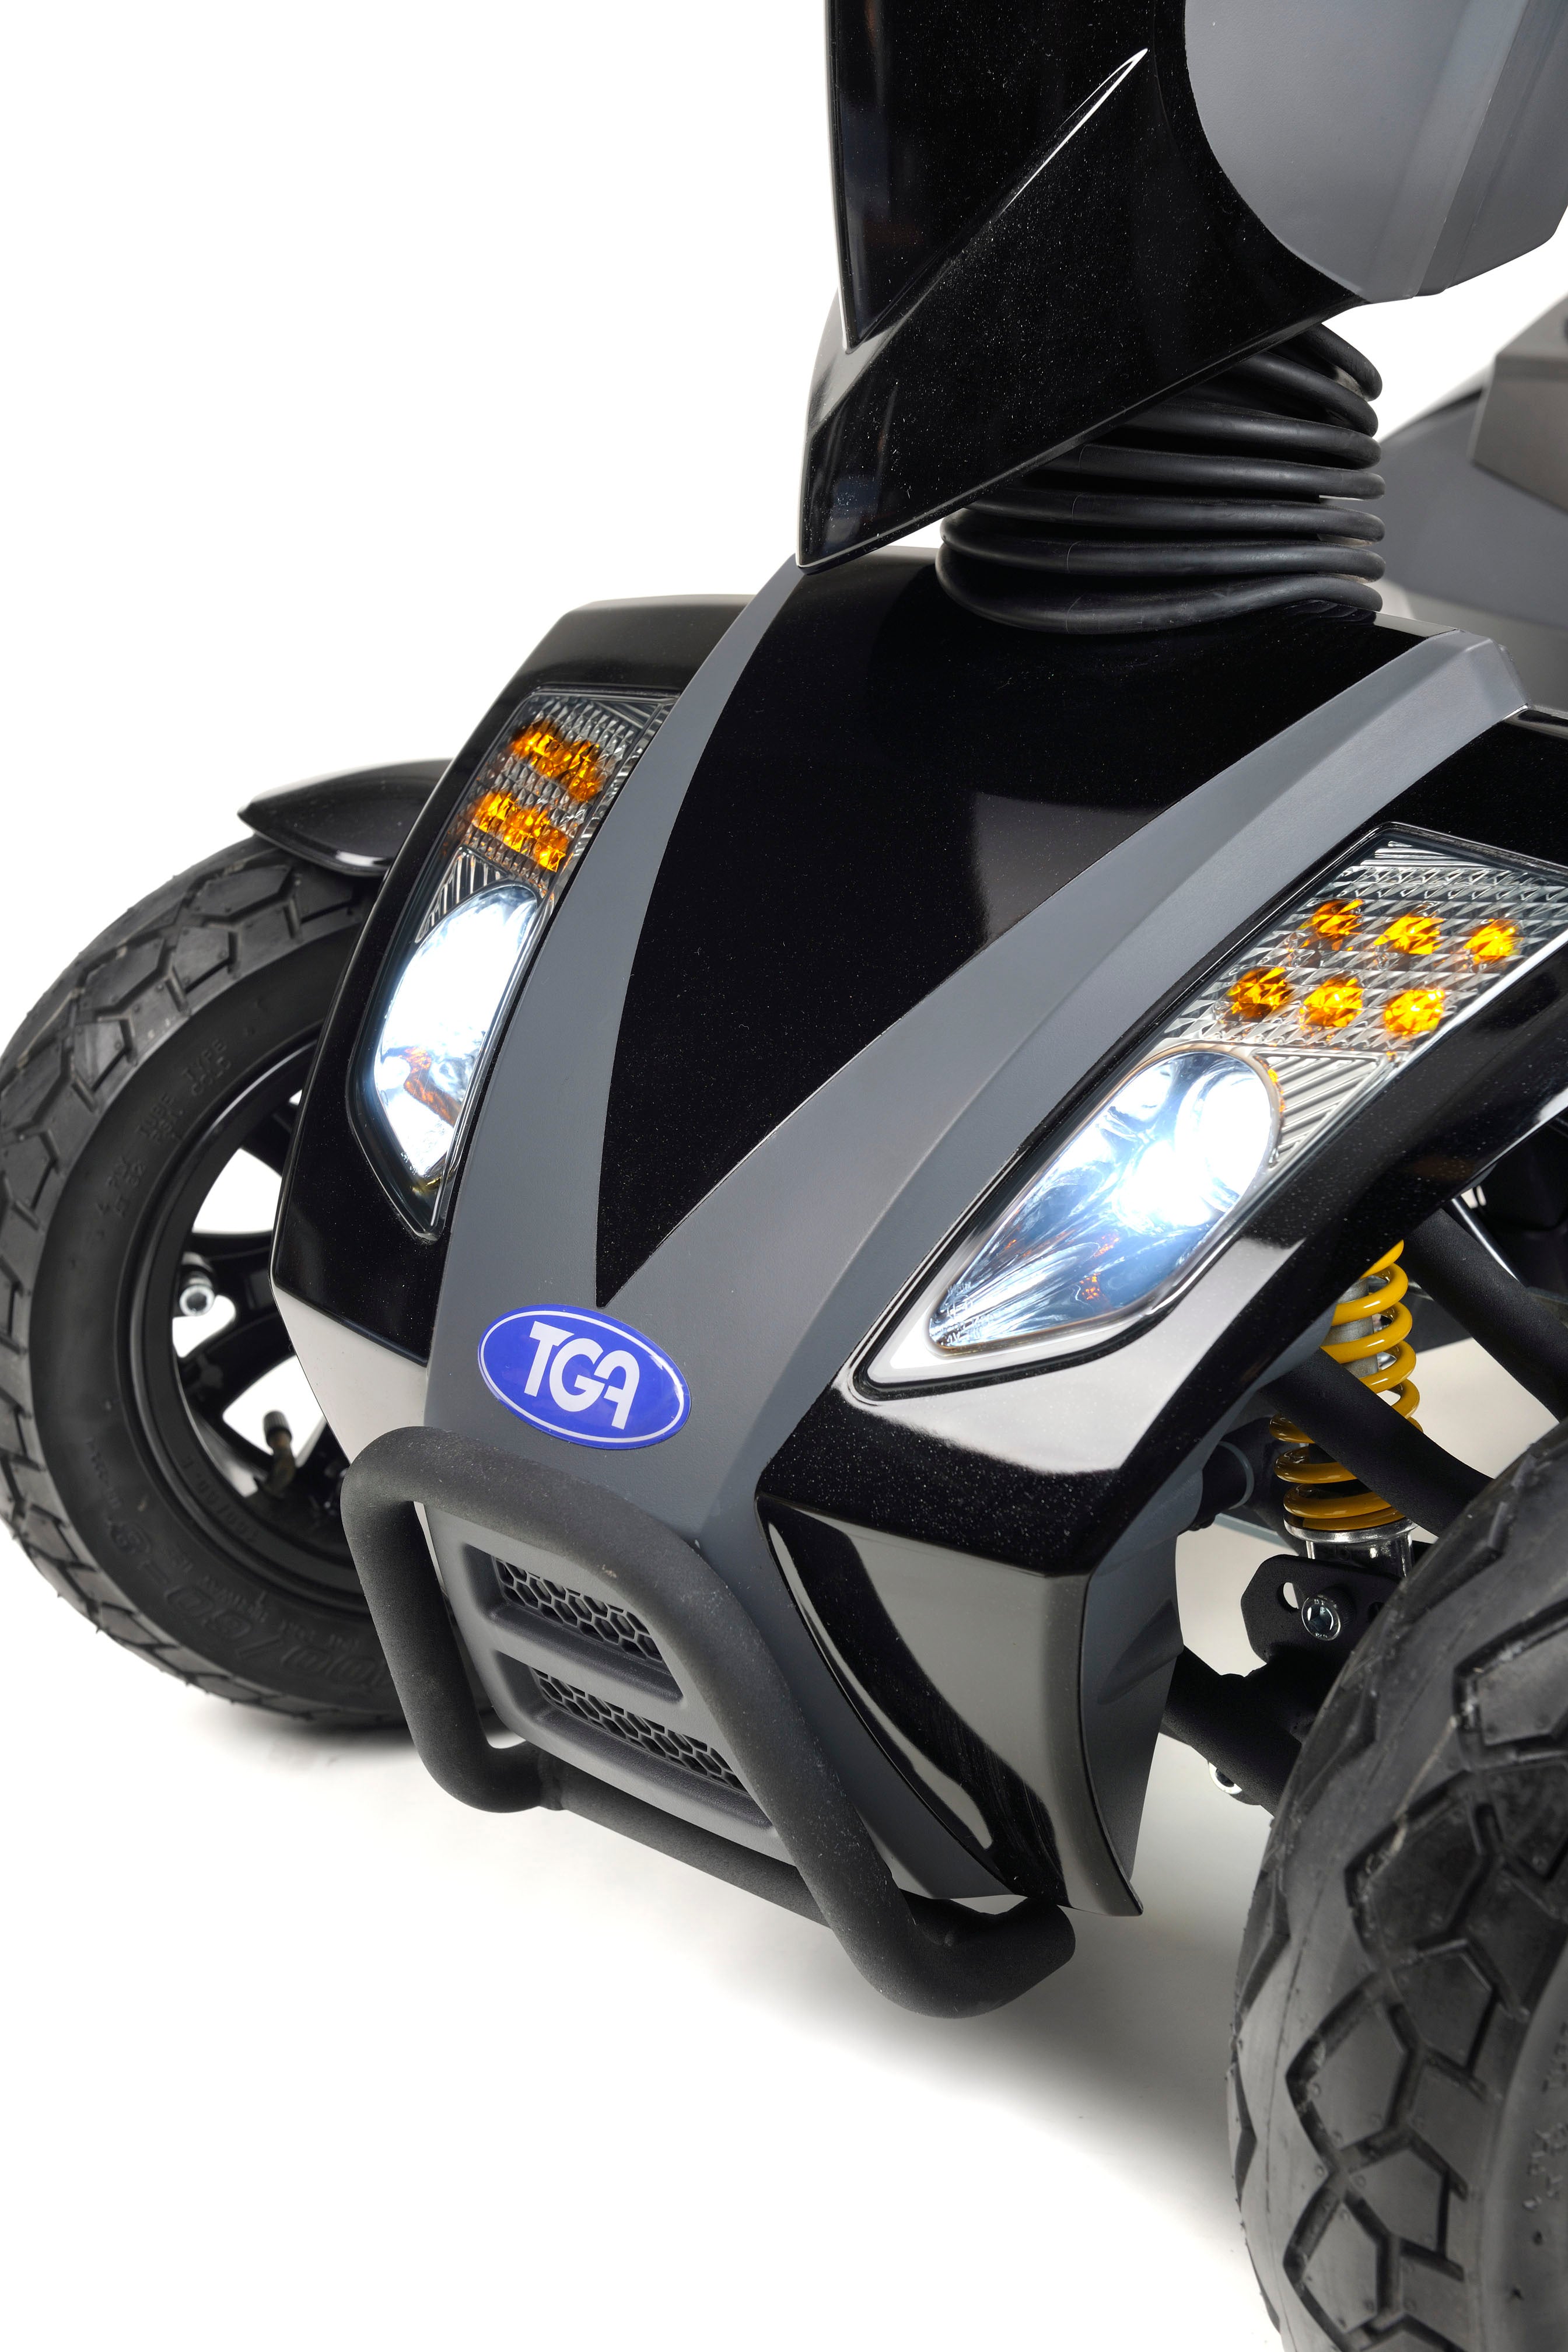 Smoked lenses and LED lights give the Vita Sport real road presence